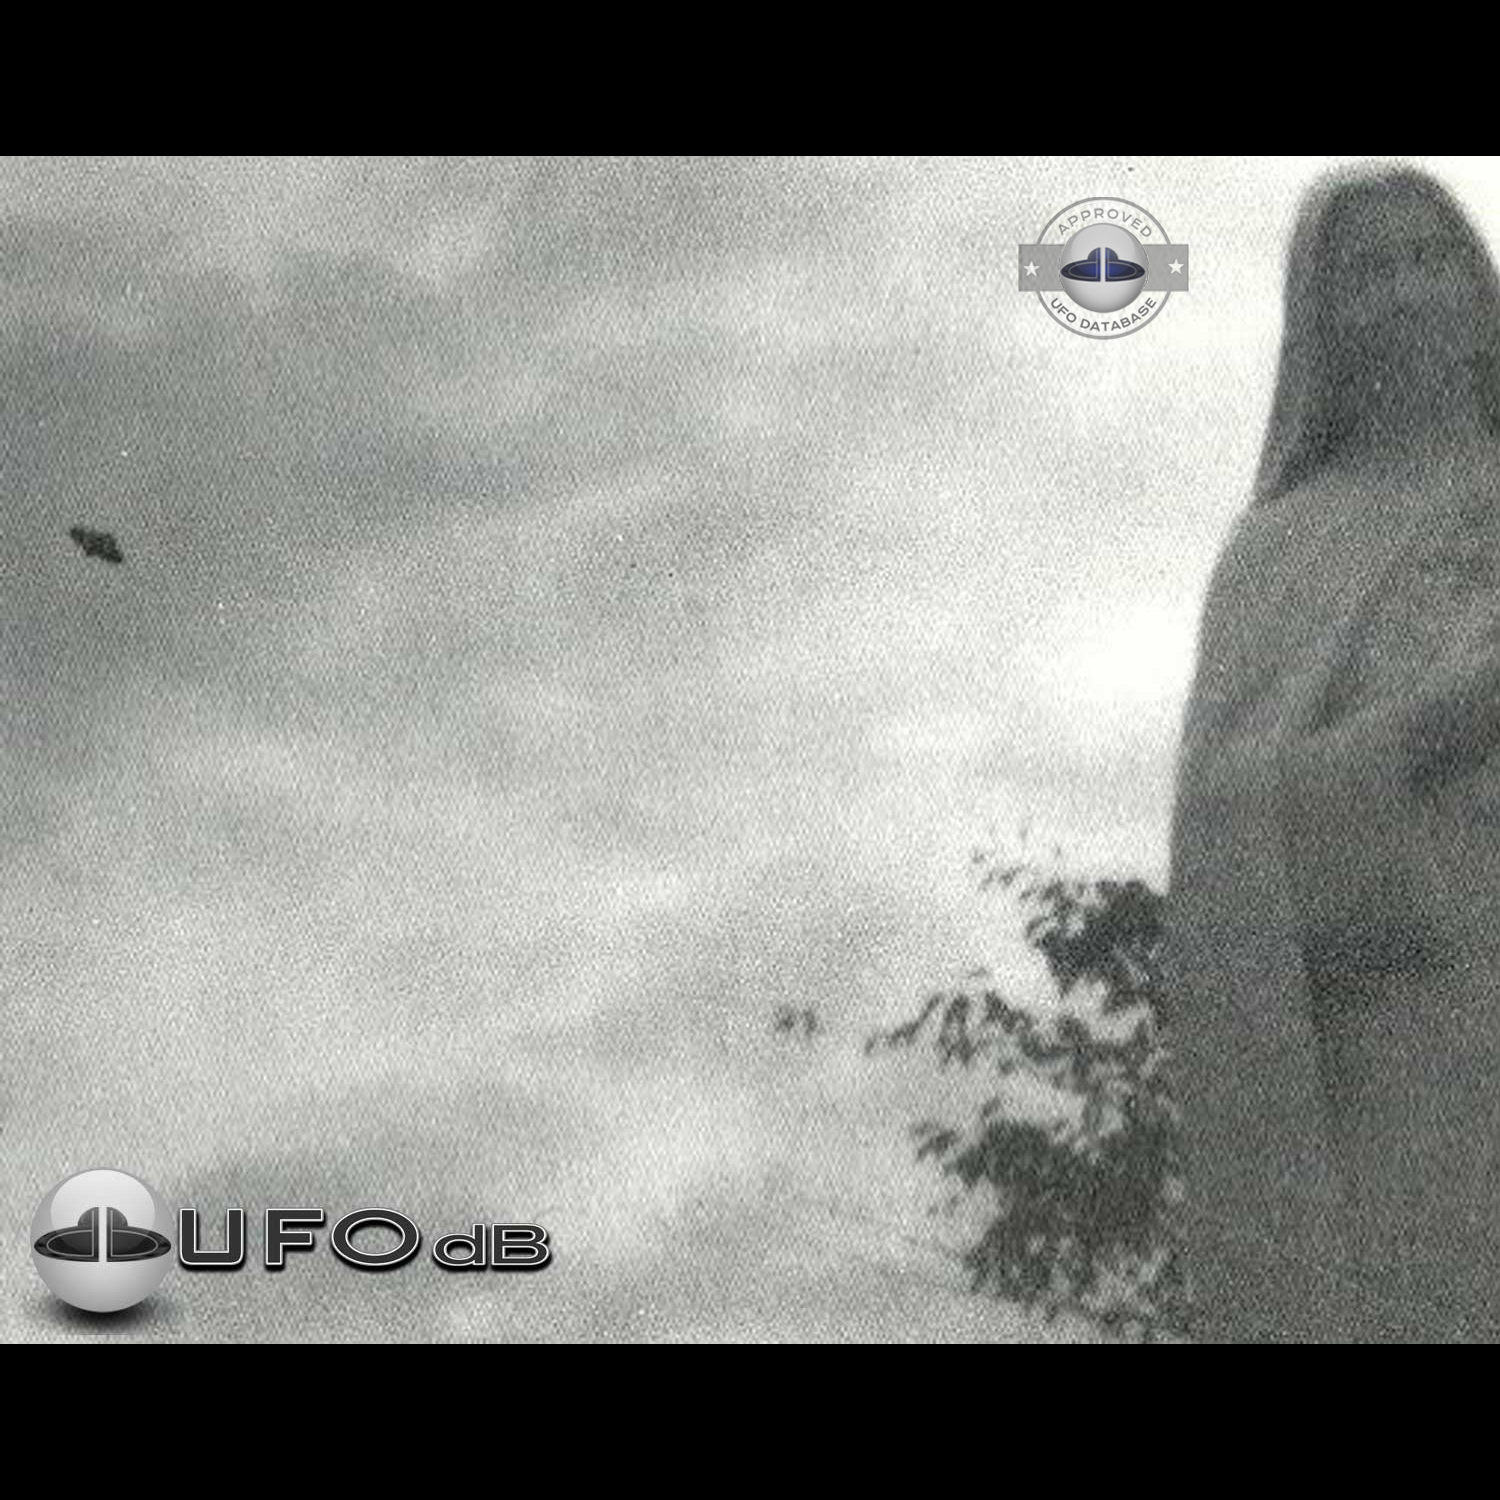 UFO over Sapporo, Hokkaido - we can see a statue of the virgin Mary UFO Picture #69-1